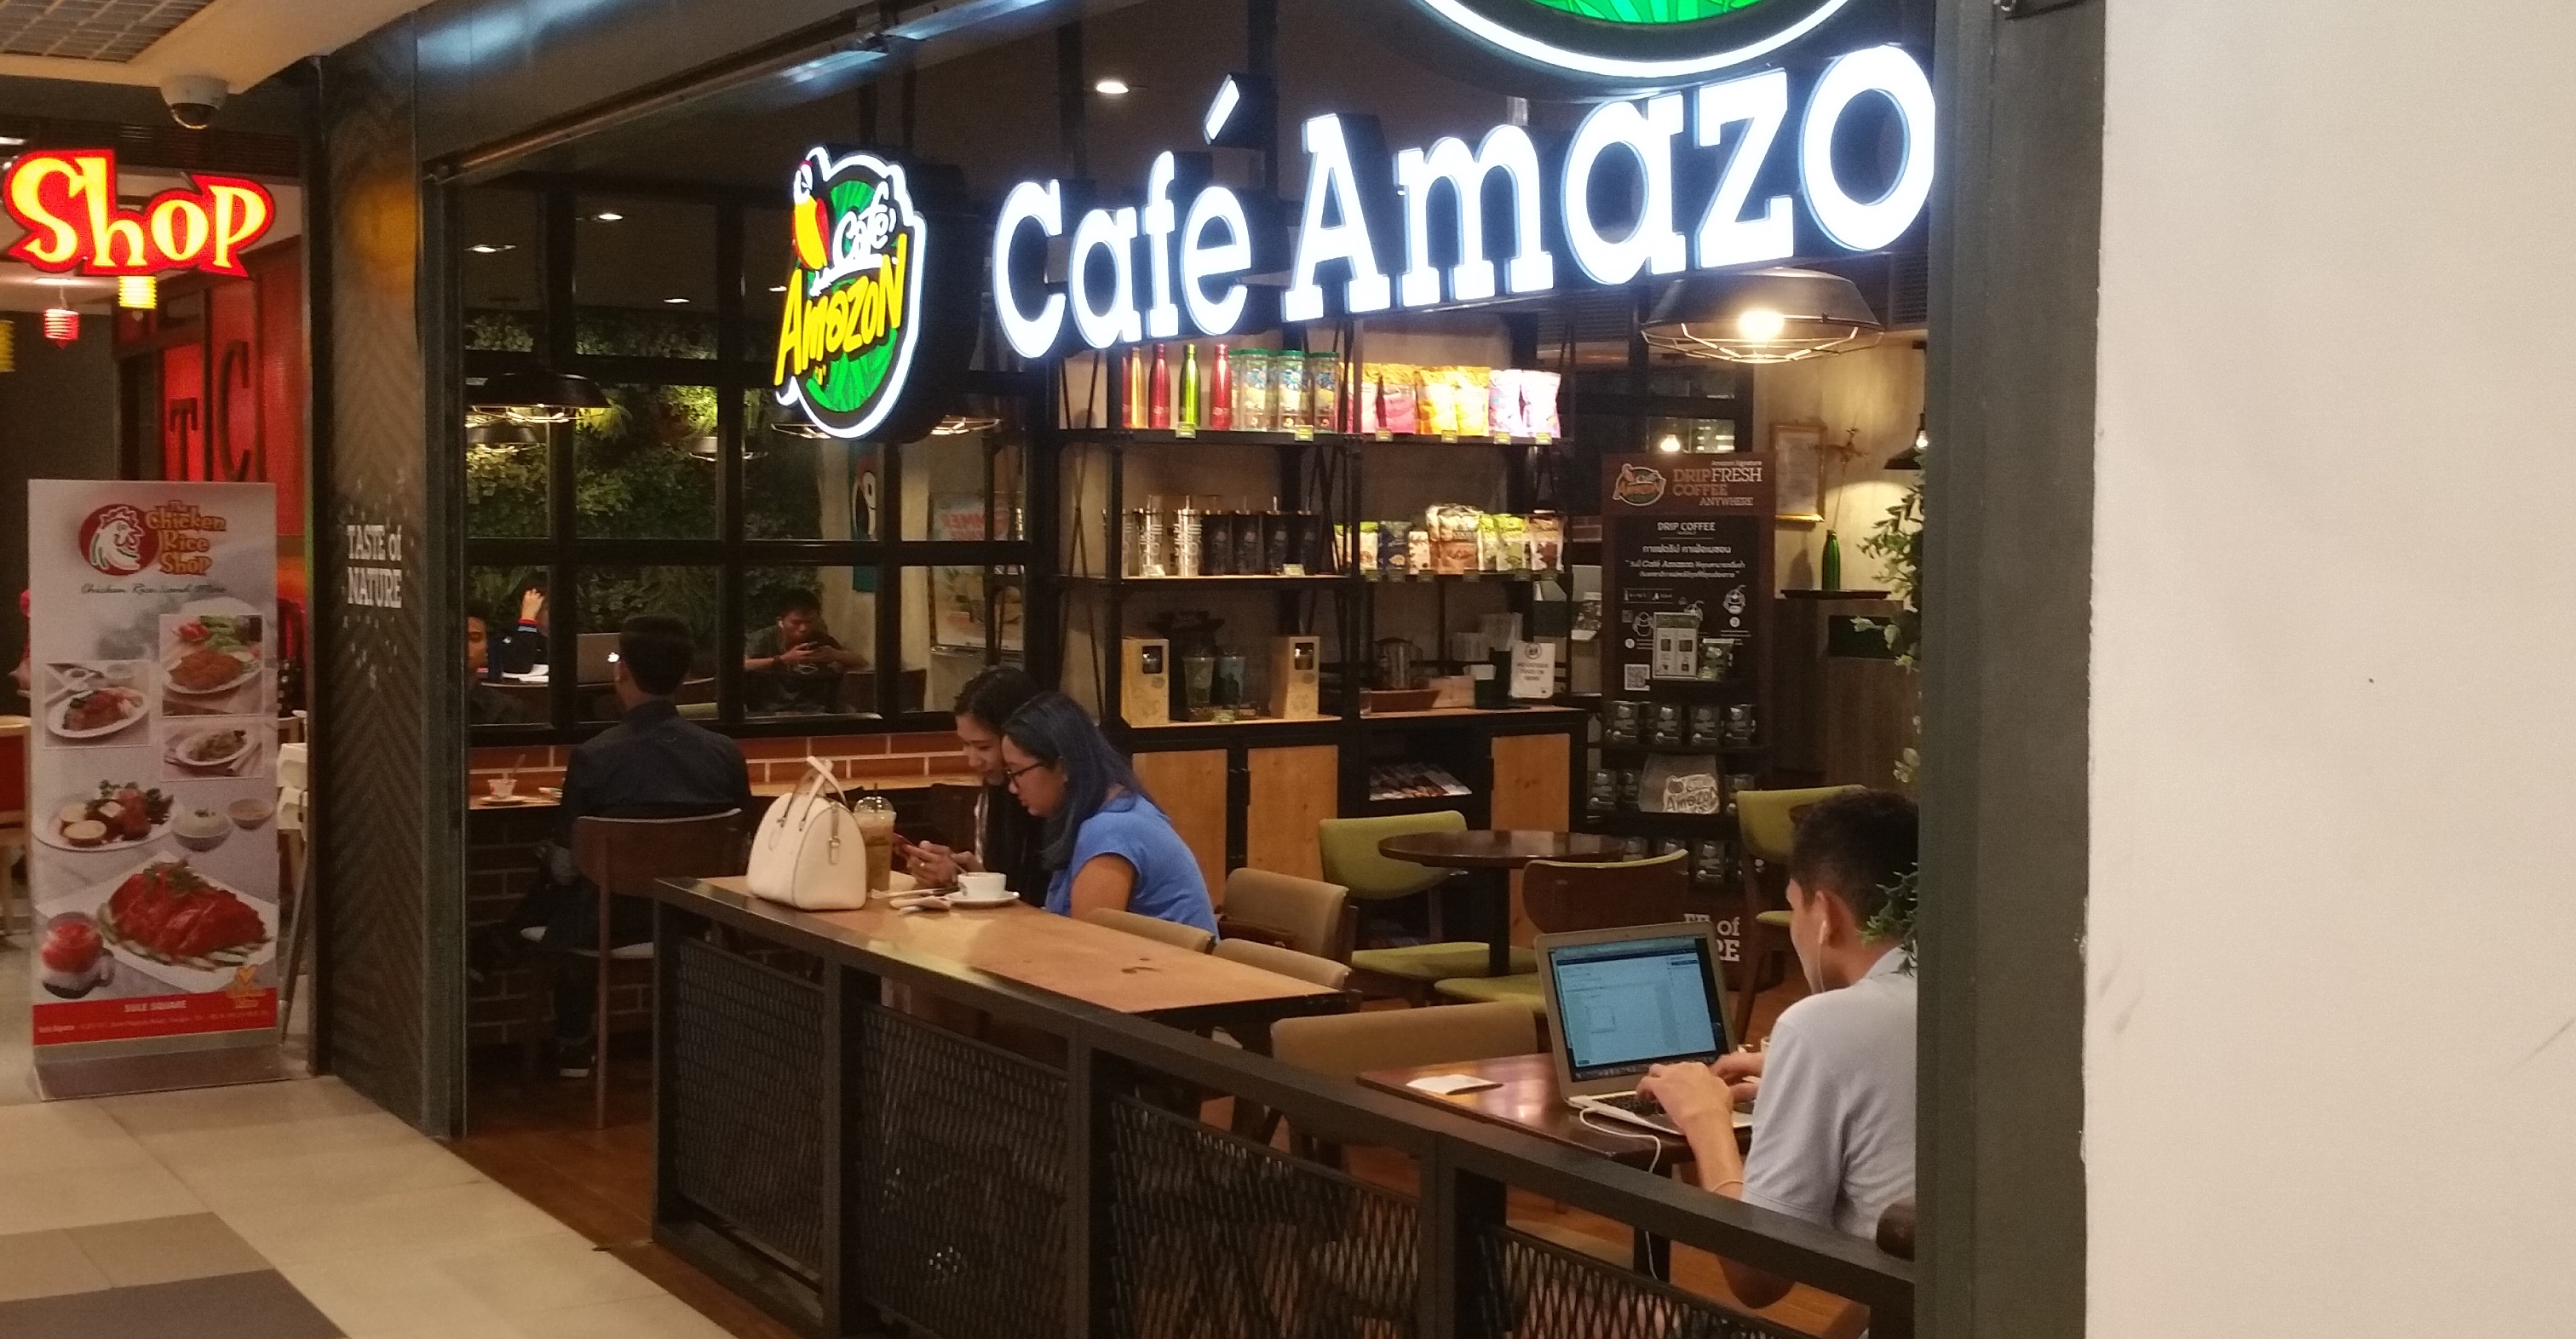 CAFE AMAZON in the basement of Sule Square